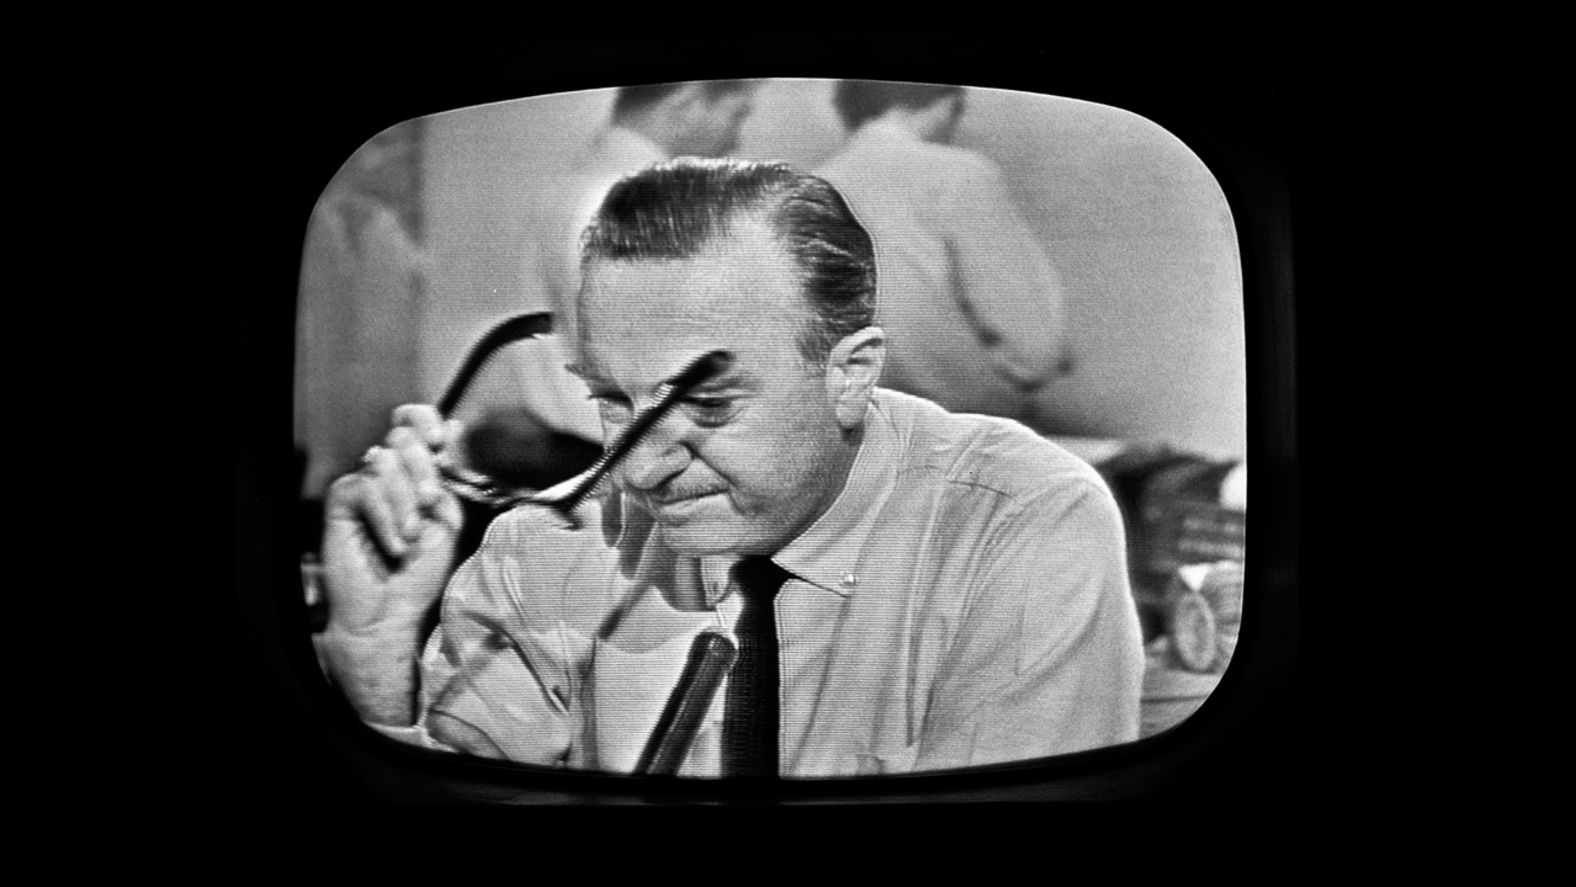 Journalist Walter Cronkite removes his glasses and prepares to announce Kennedy's death. At 1 p.m., Kennedy was pronounced dead by Parkland Hospital doctors, becoming the fourth US president killed in office.